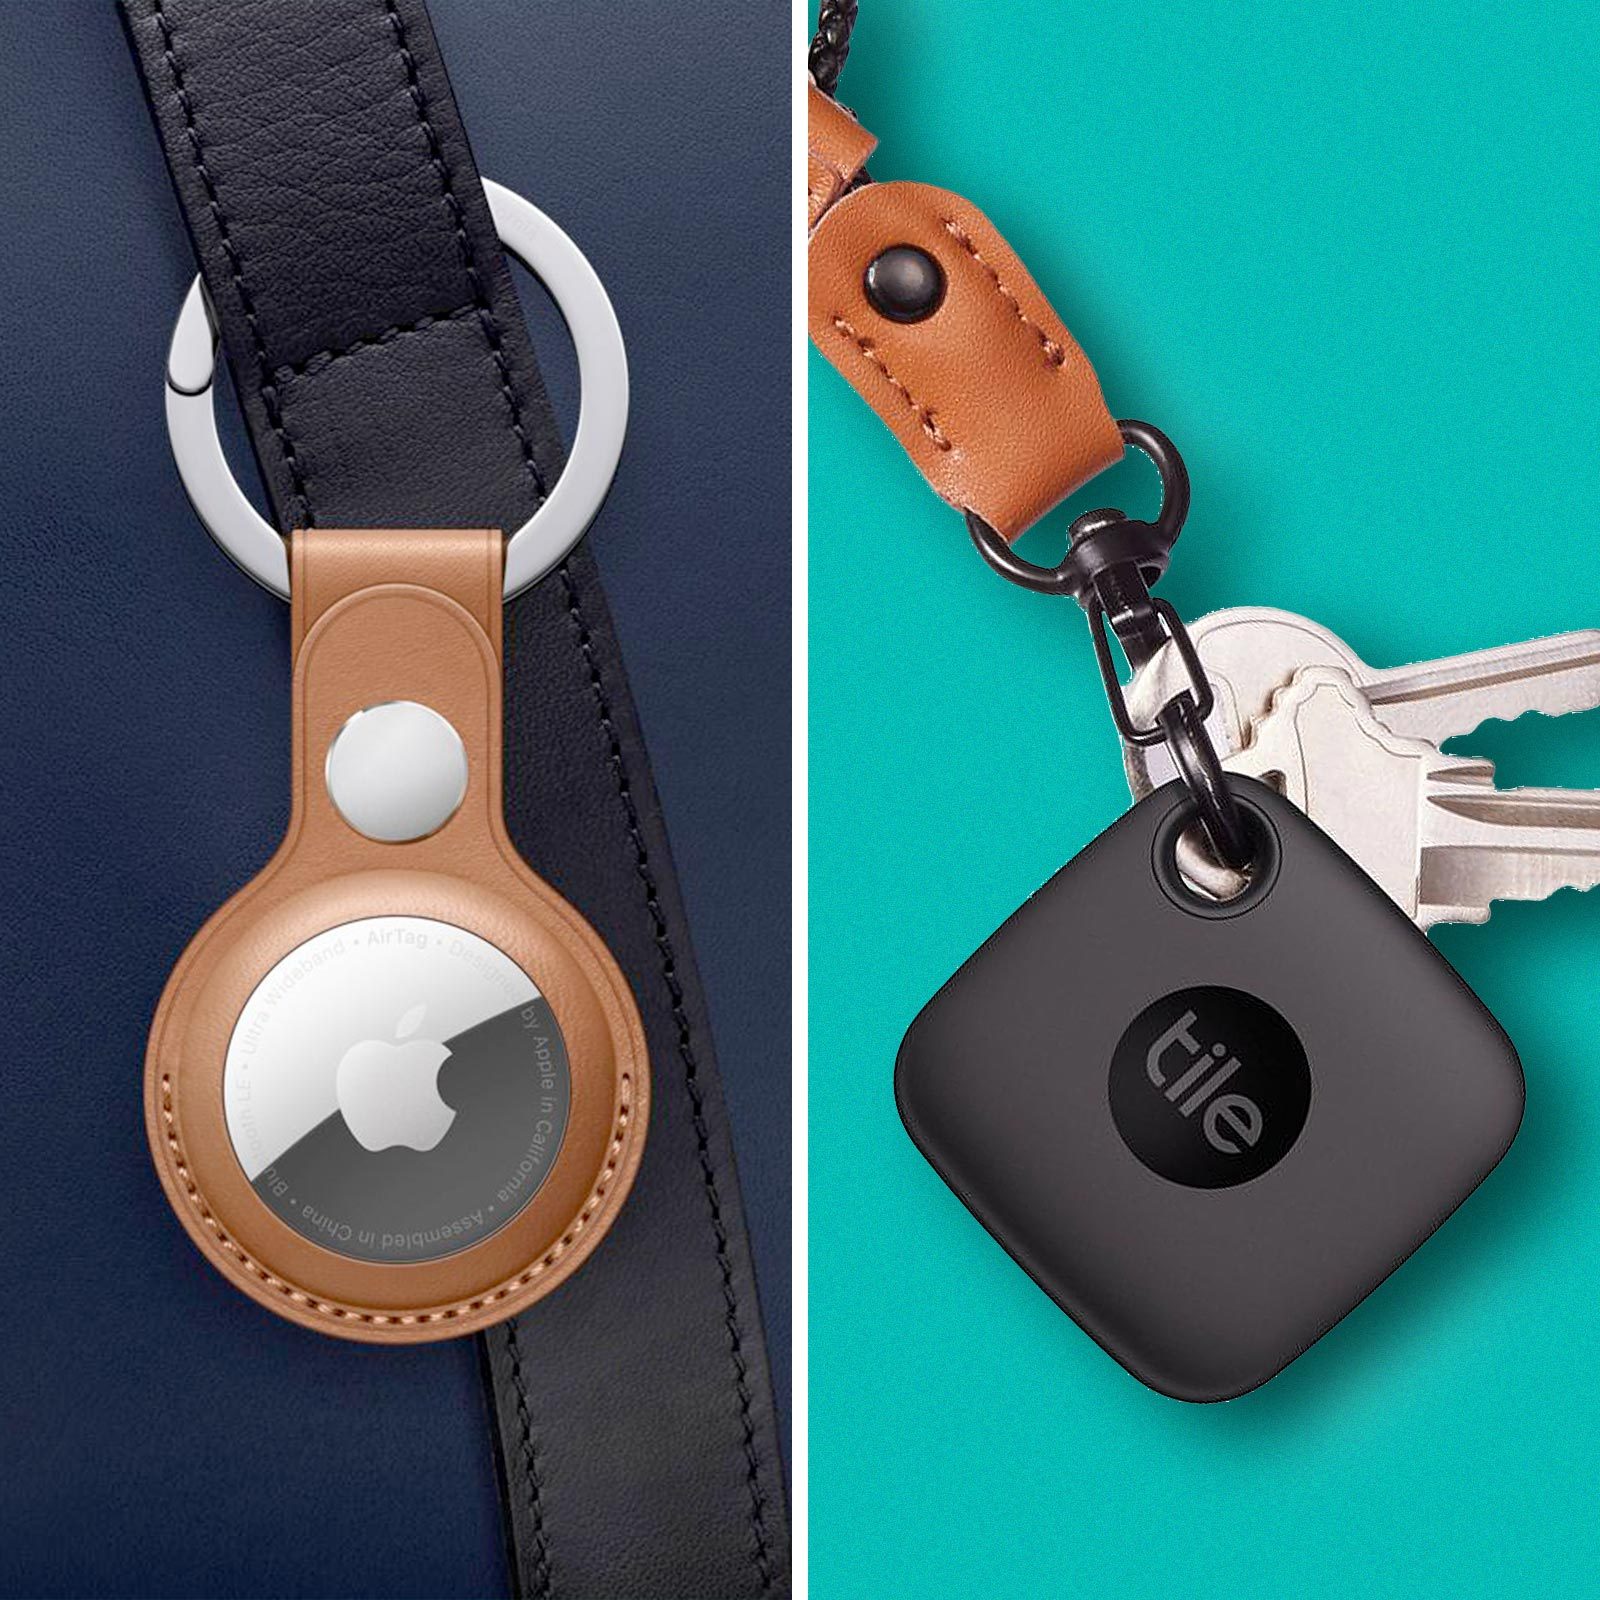 Apple AirTag review: The best key finder for the iPhone